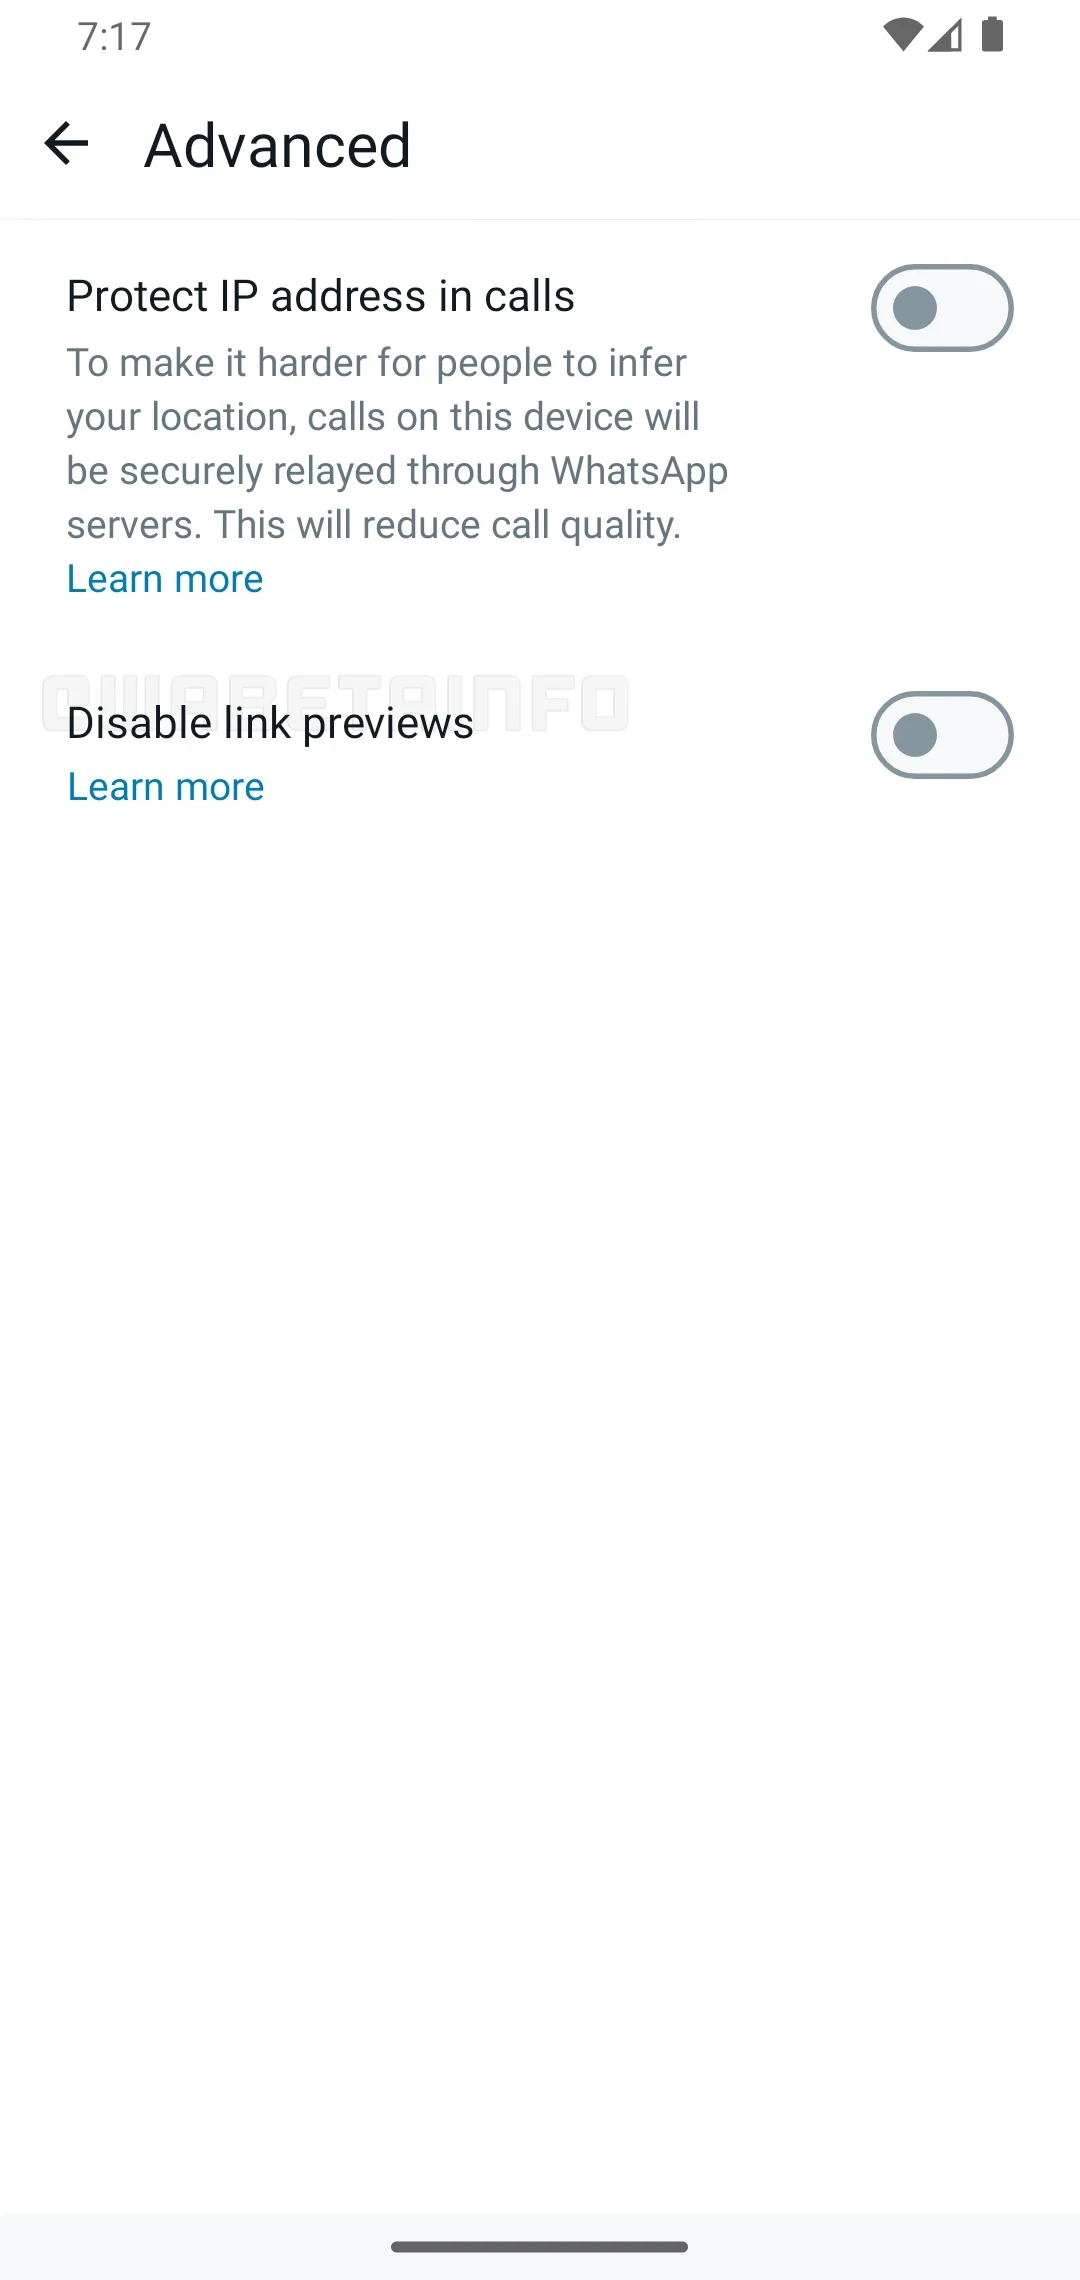 whatsapp for android disable link previews